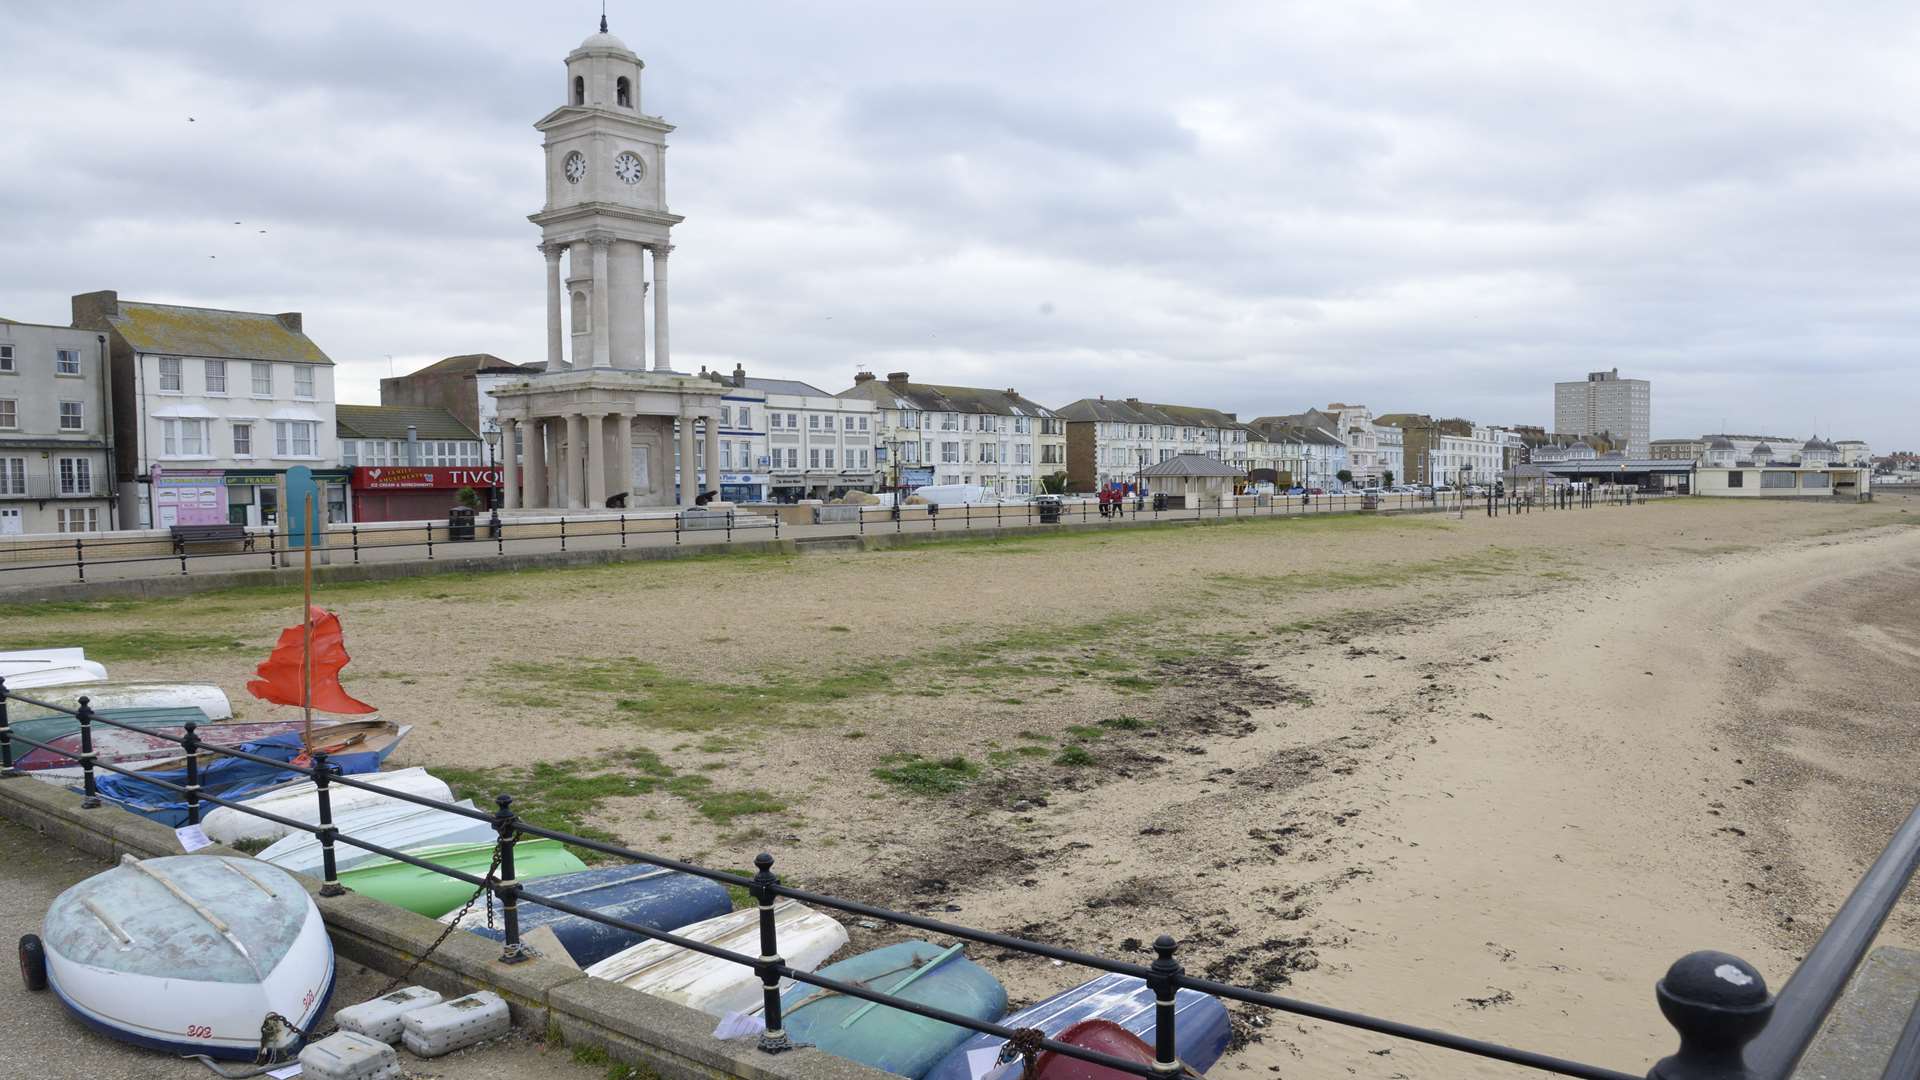 Buyers have been clamouring for a slice of the market in Herne Bay